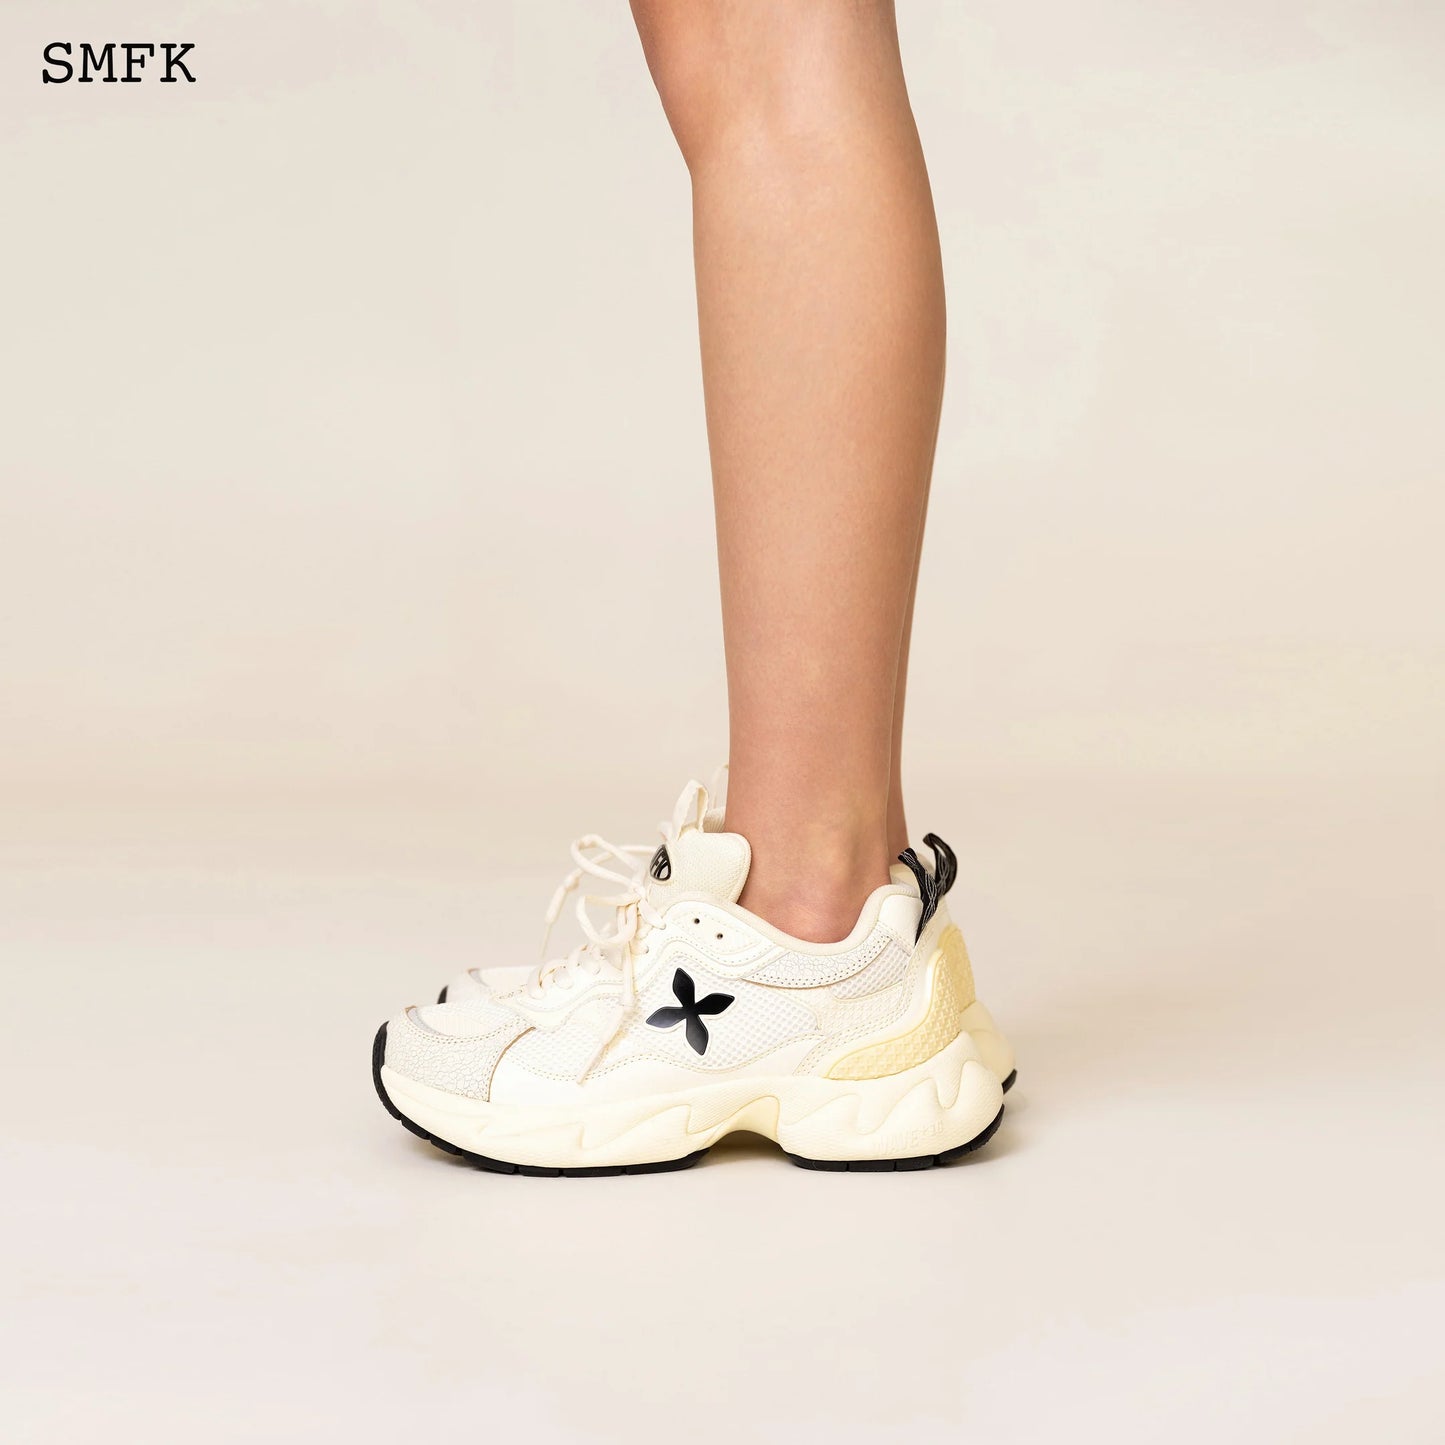 Compass Wave Retro Jogging Shoes In White